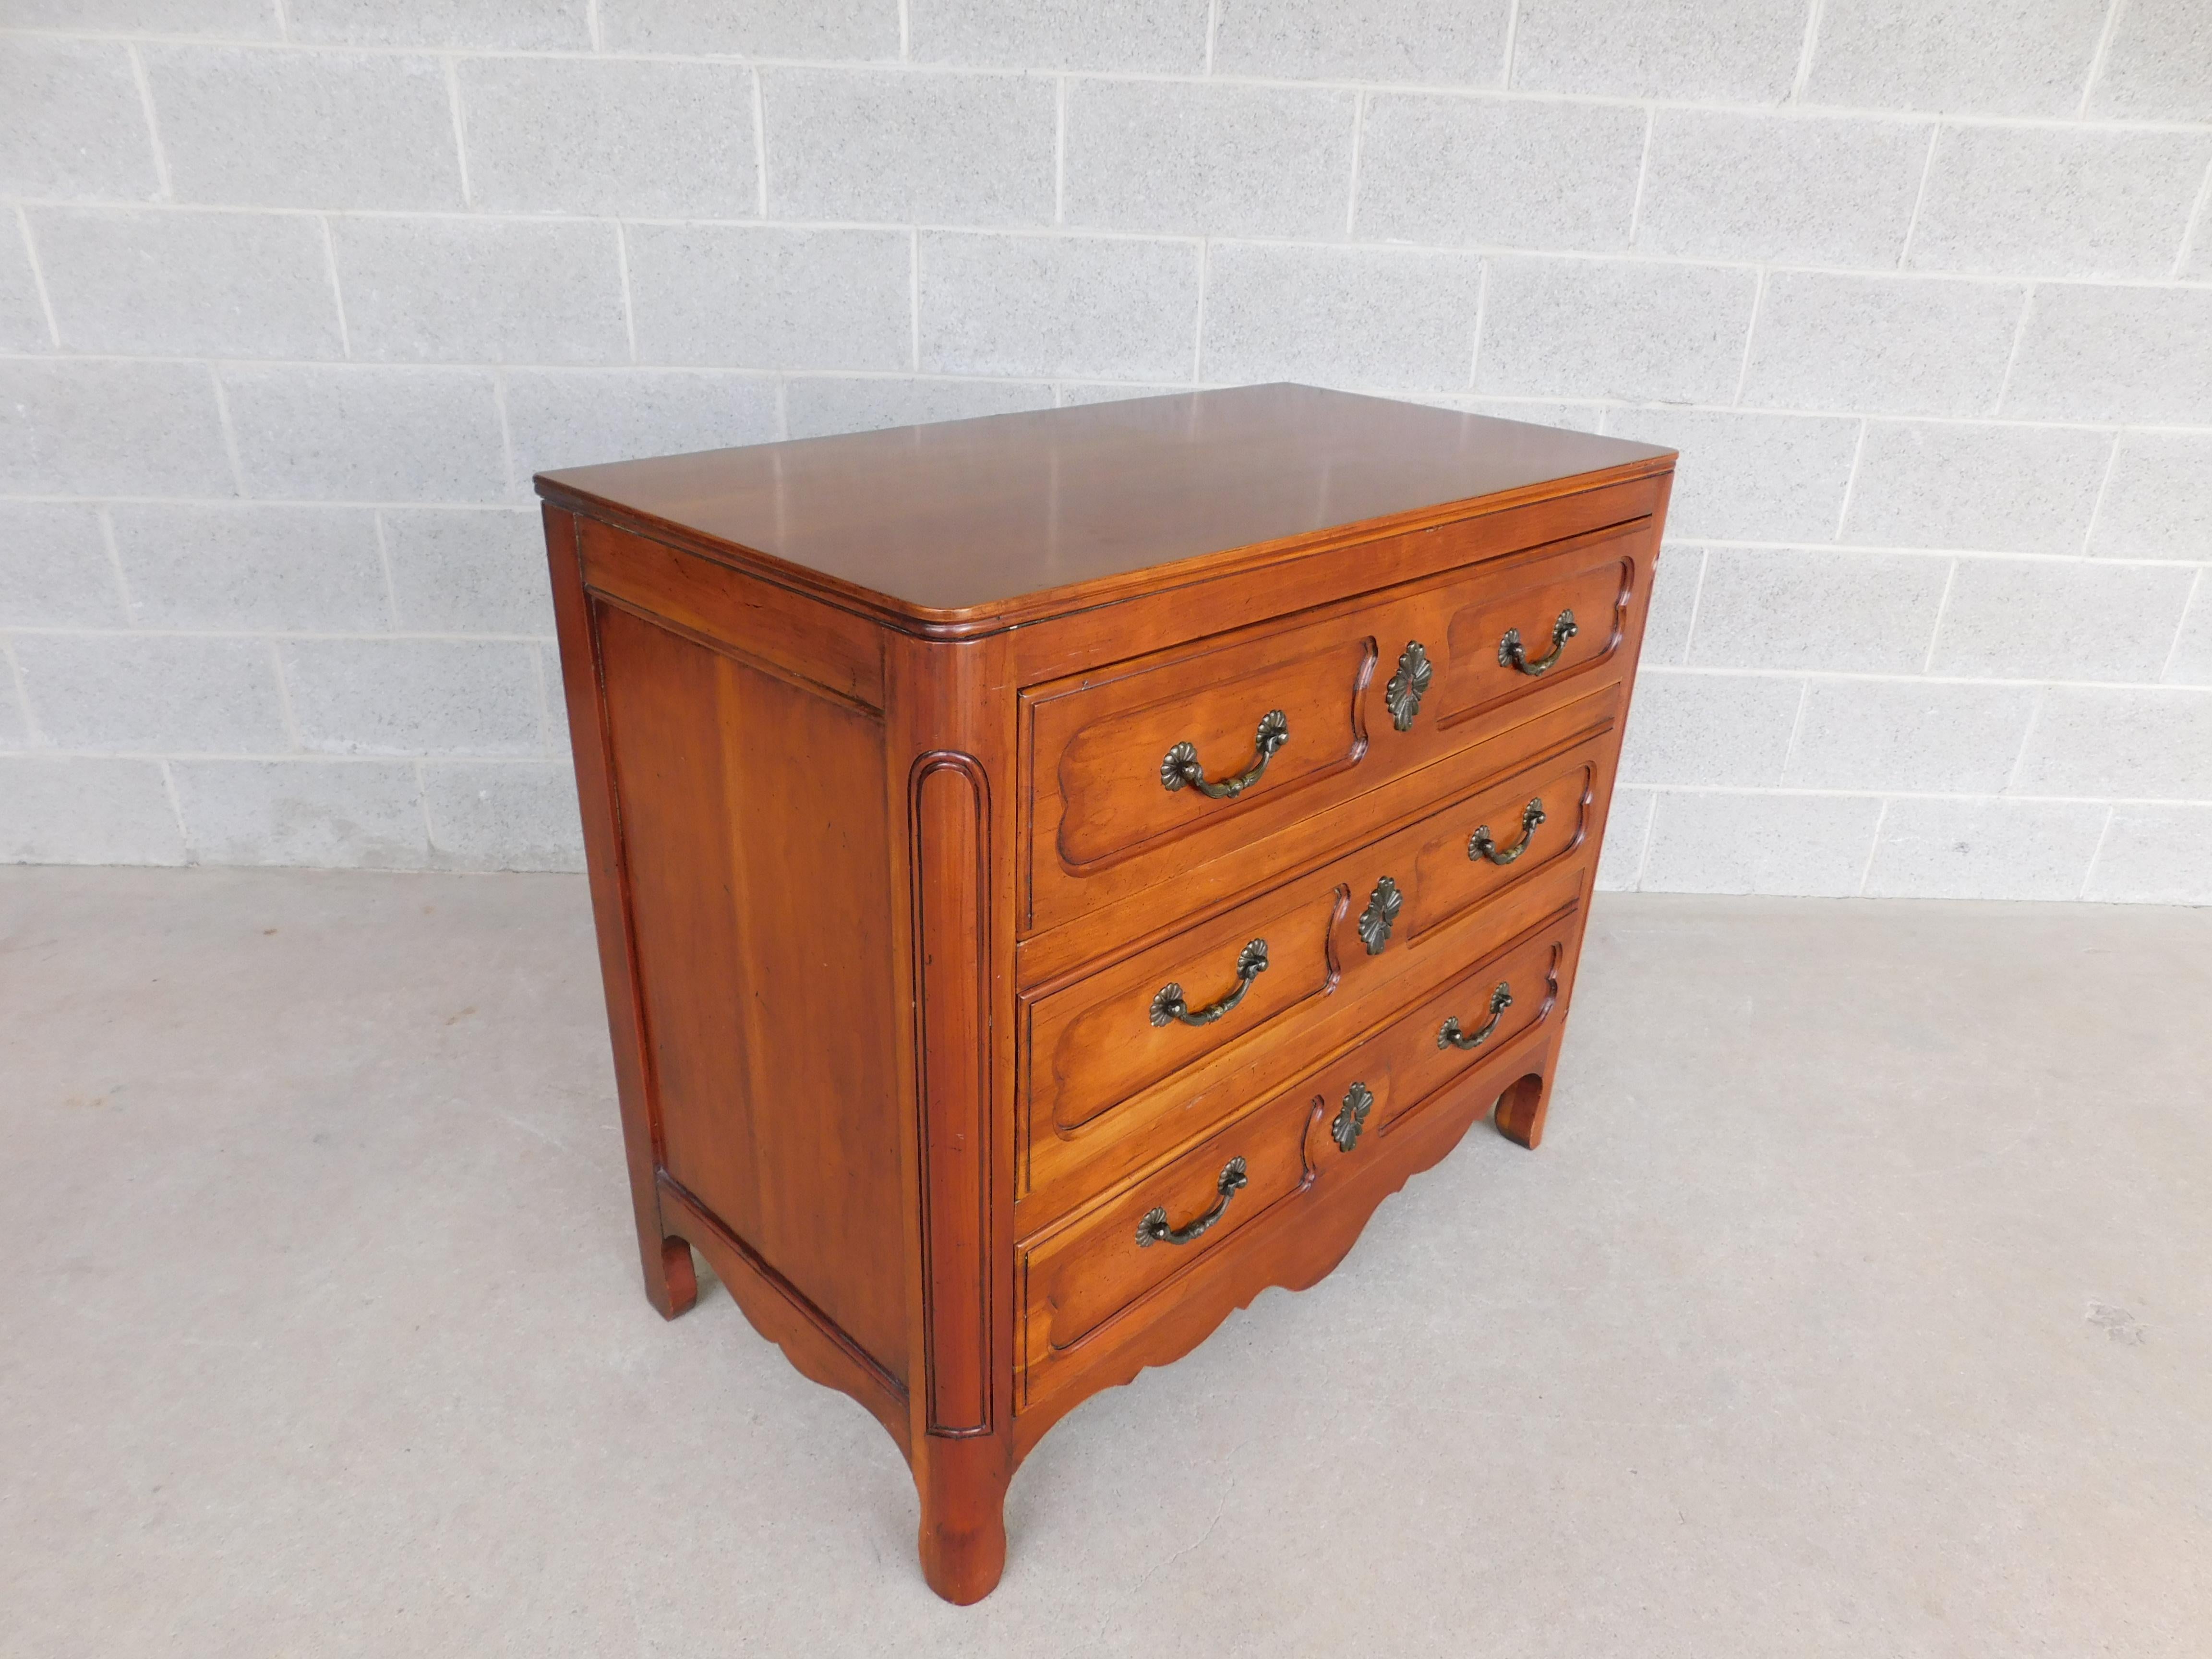 John Widdicomb French country style 3 drawer commode. Fruitwood Constructed, French Country Understated Style, 3 Recessed Panel Style Dovetailed Drawers, Quality Hardware / Pulls Faux Key Lock Hole Plate. Rounded Front Post. 
Very Good Original